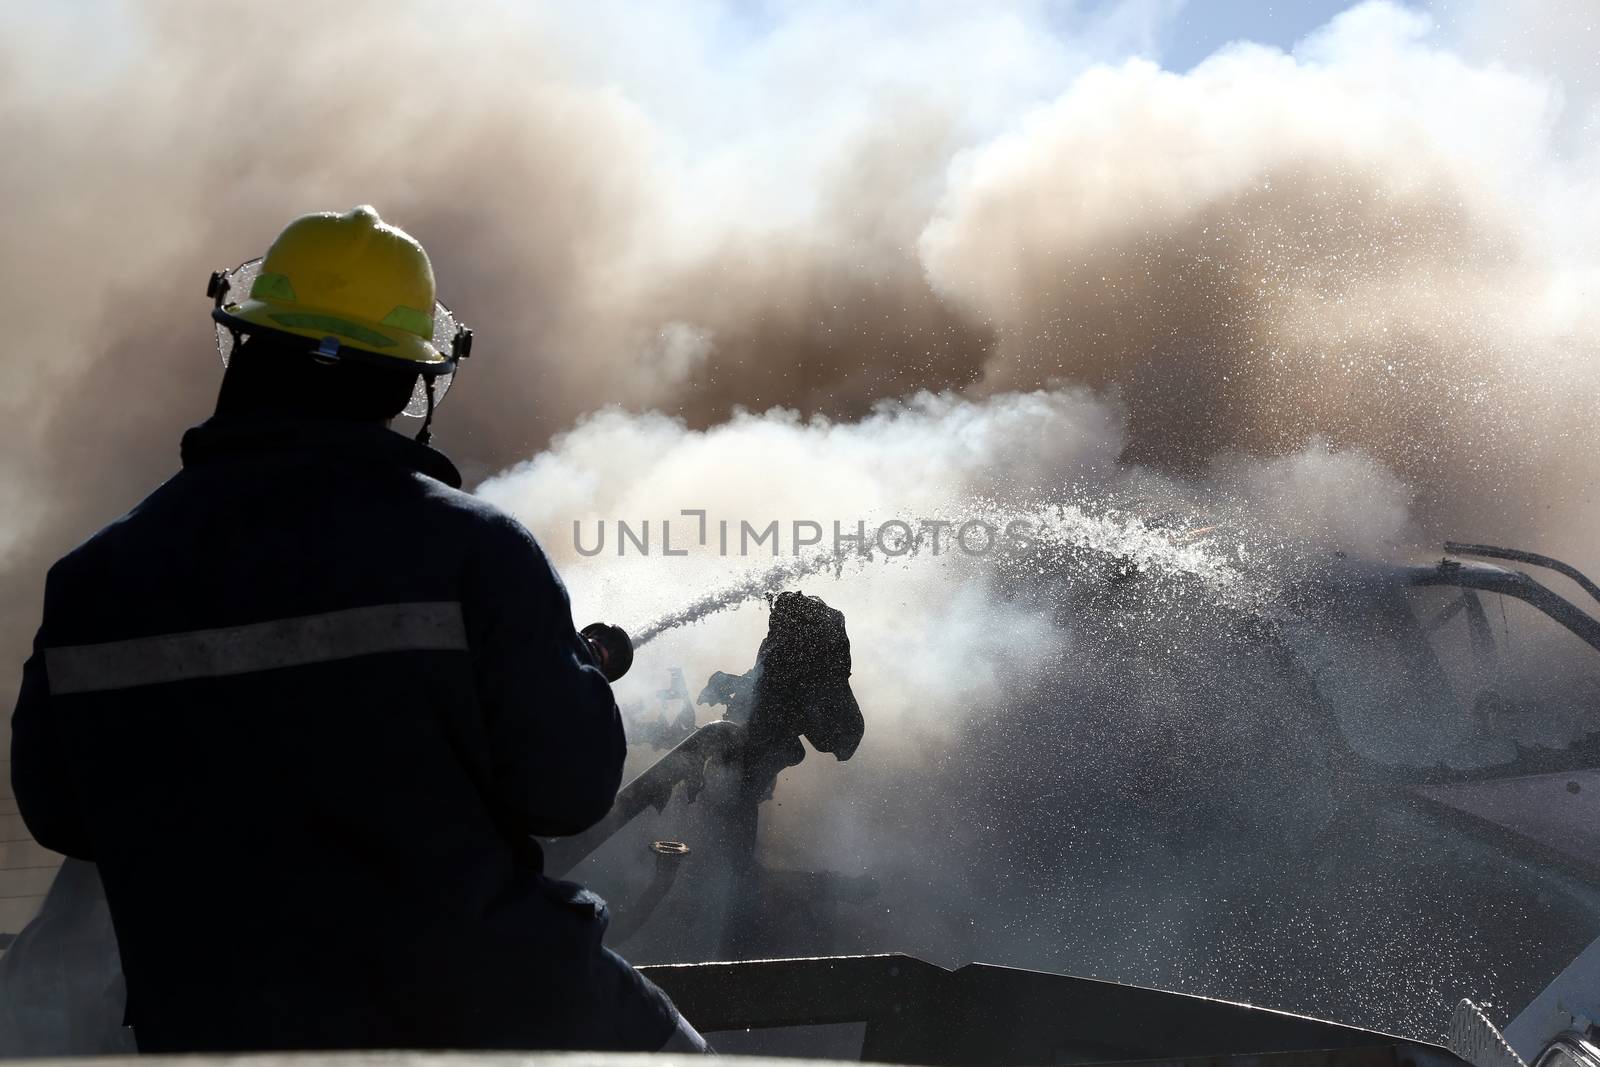 Fireman spraying water on a burnt out and smoking vehicle